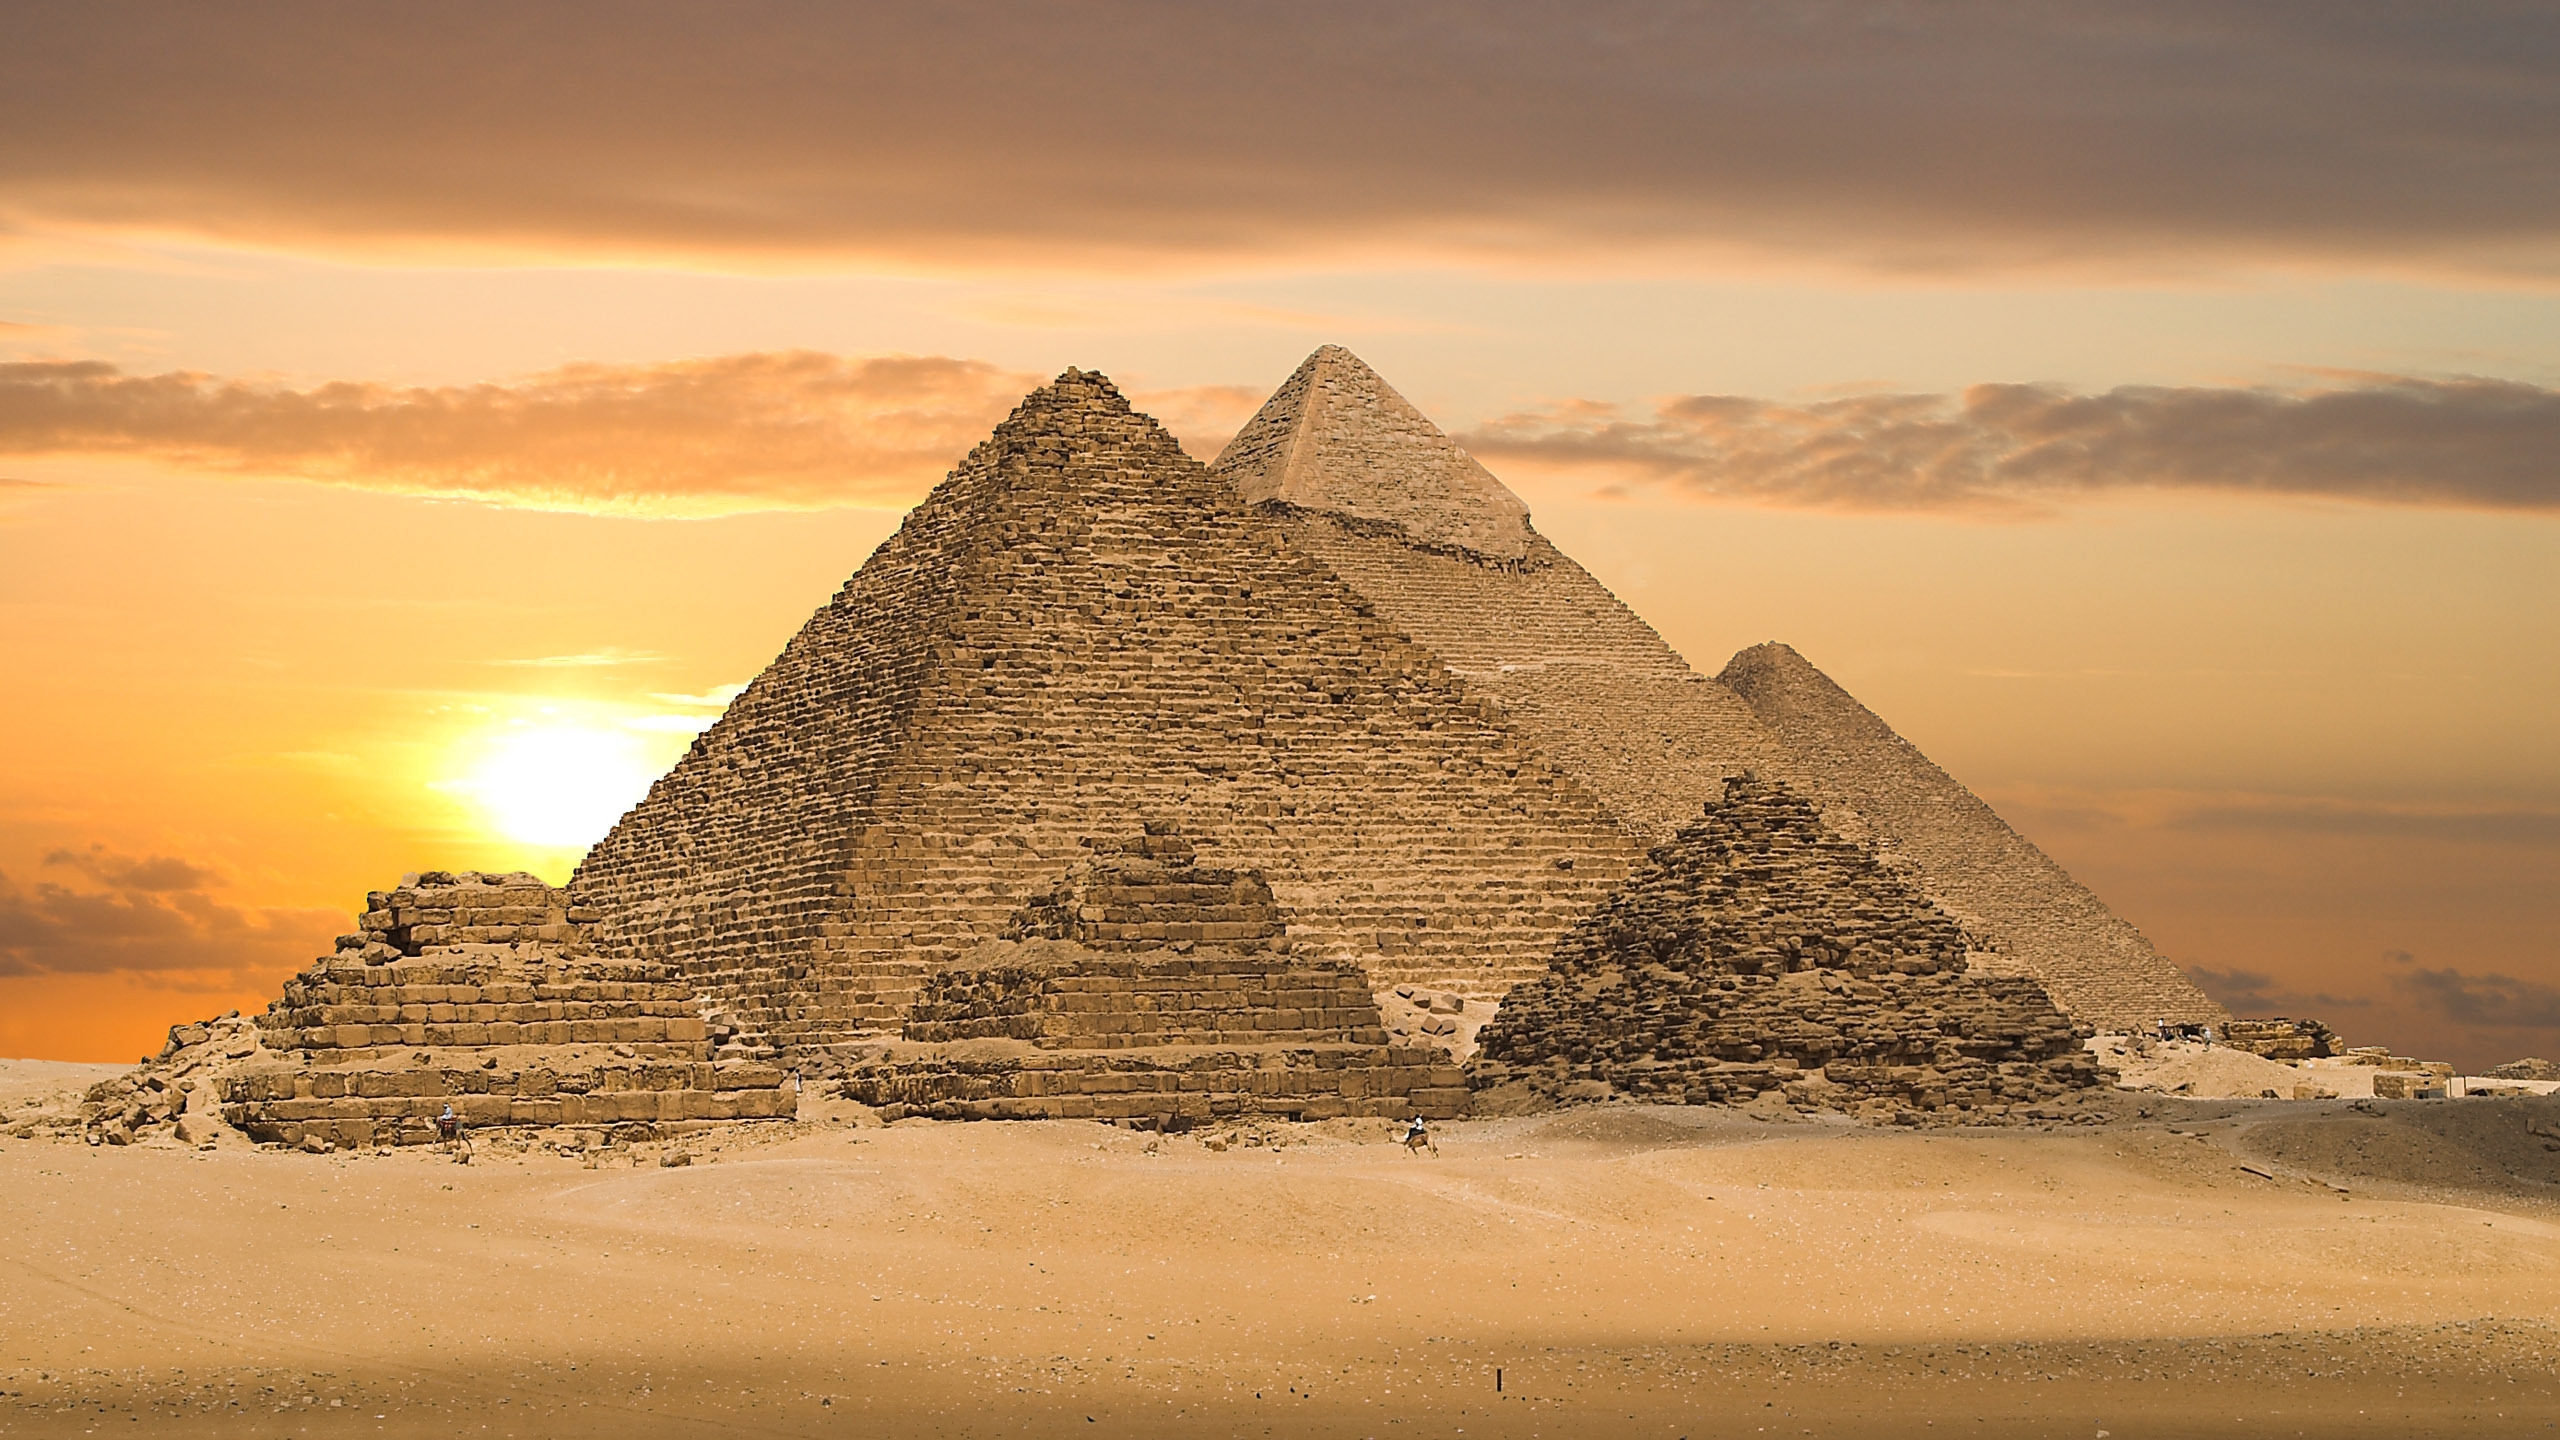 Pyramids of Egypt for 2560x1440 HDTV resolution